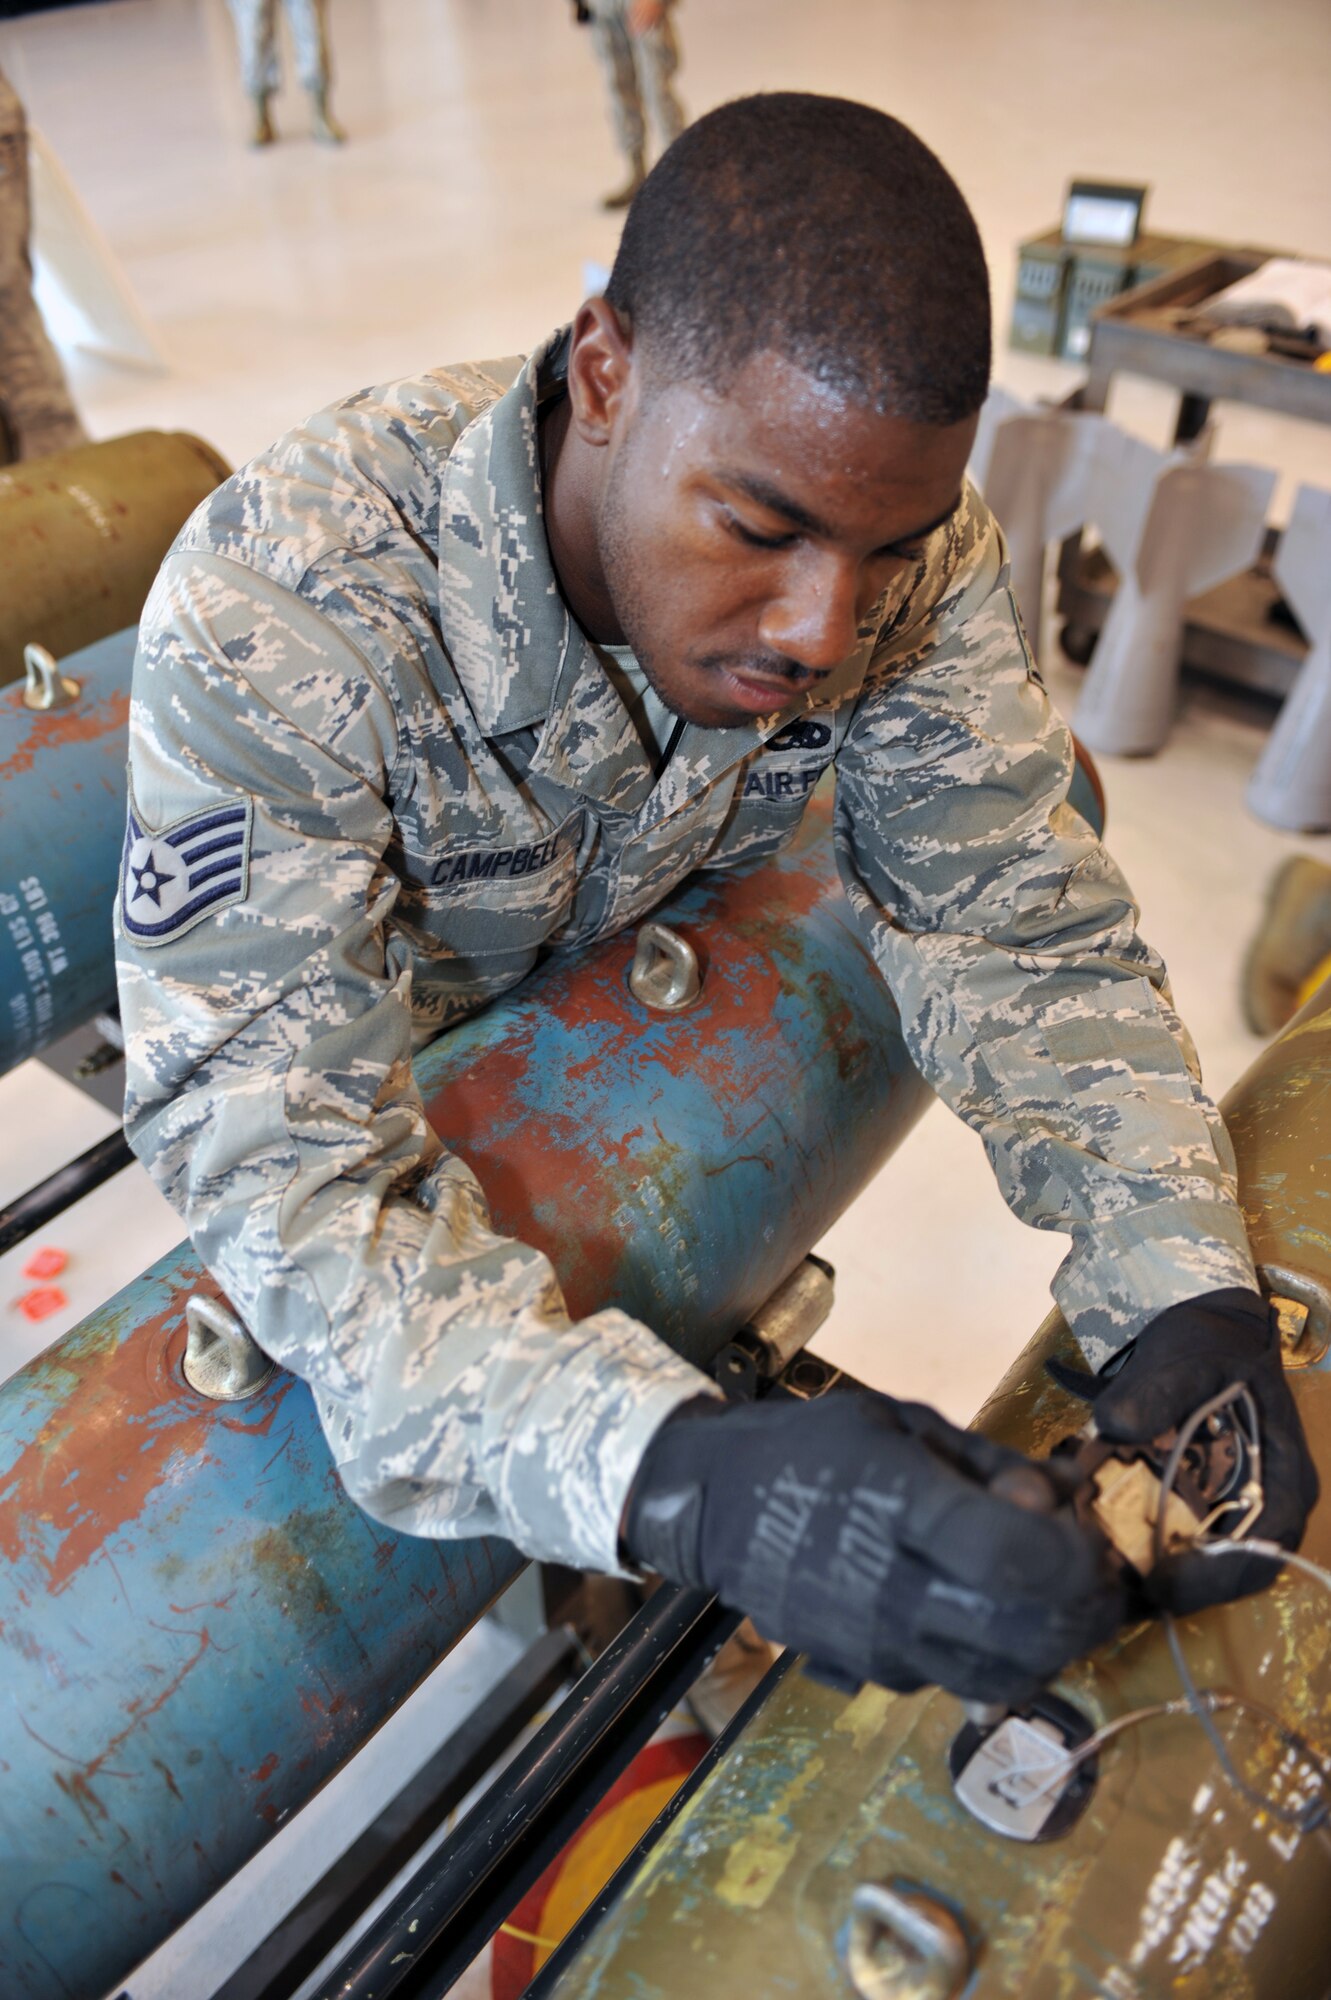 WHITEMAN AFB, Mo. - Staff Sgt. Tyler Campbell, 509th Munitions Squadron, installs an arming device into a 500-pound MK-82 bomb during a practice session for the Air Force Global Strike Command Challenge, Jul. 12. Sergeant Campbell was assigned to install the arming devices on each of the 12 bombs during the practice session. 